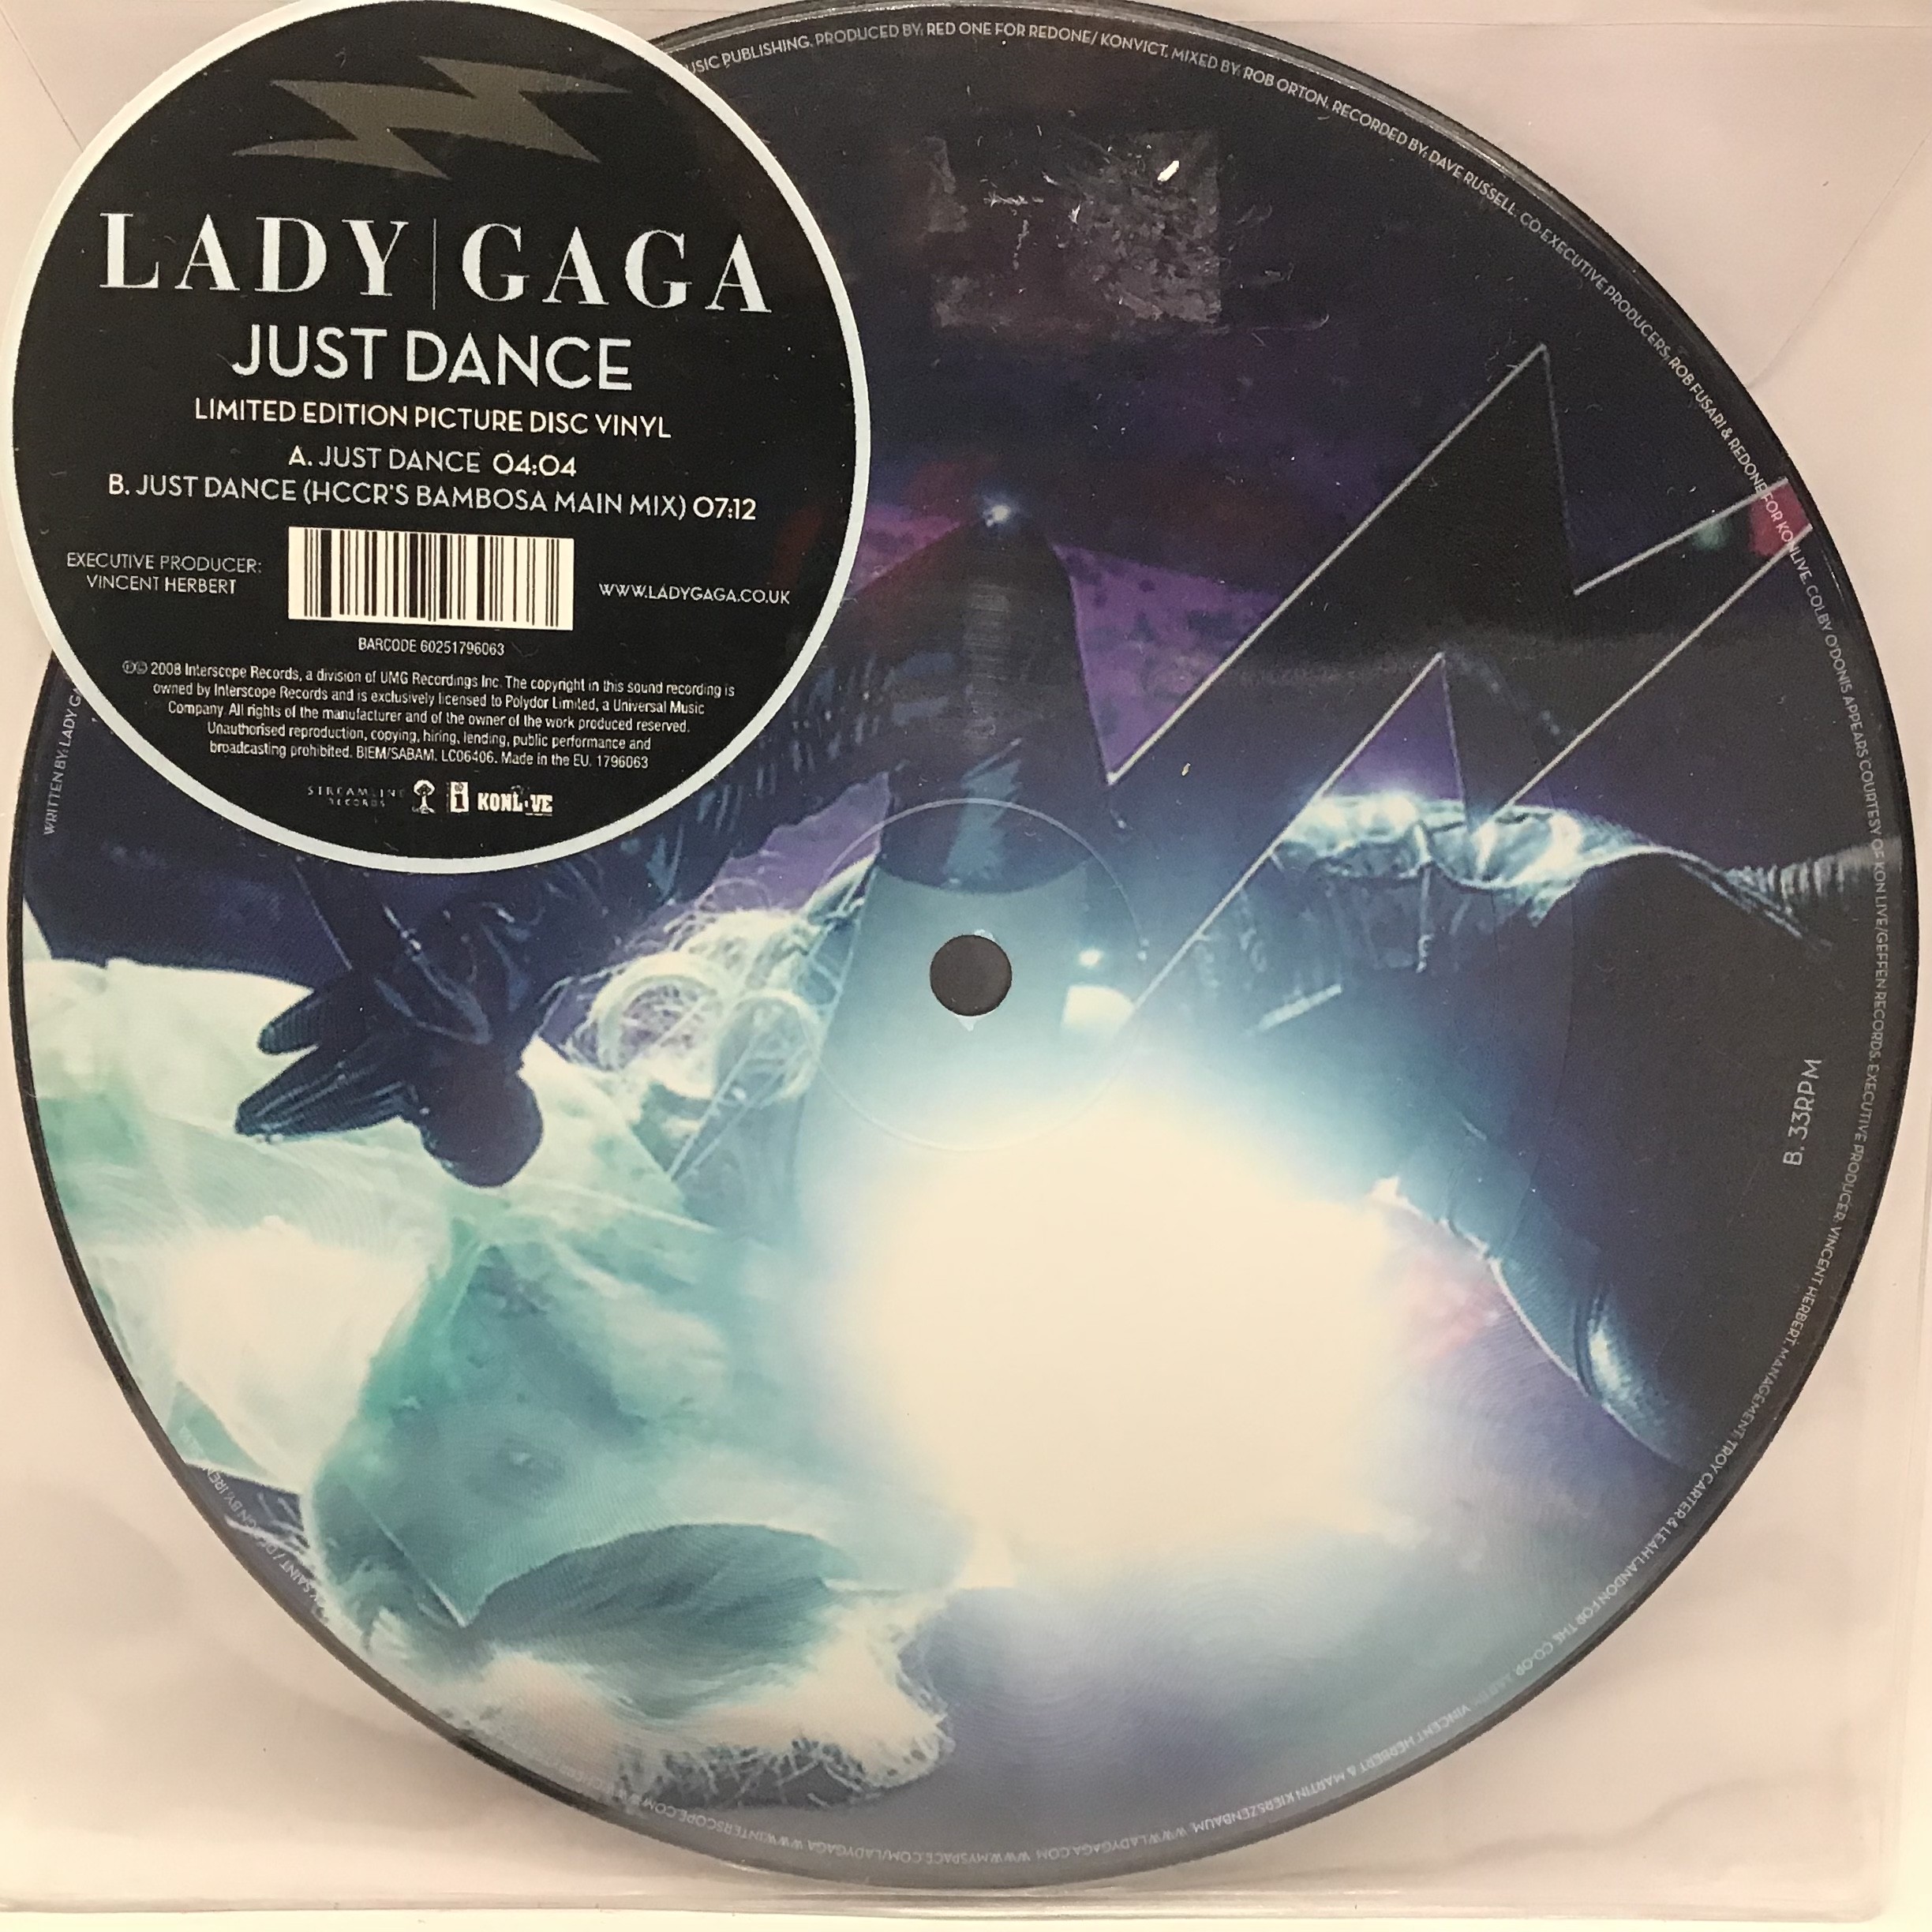 LADY GAGA ‘JUST DANCE’ 7” PICTURE DISC. This is a limited release of the 2008 2 track picture disc